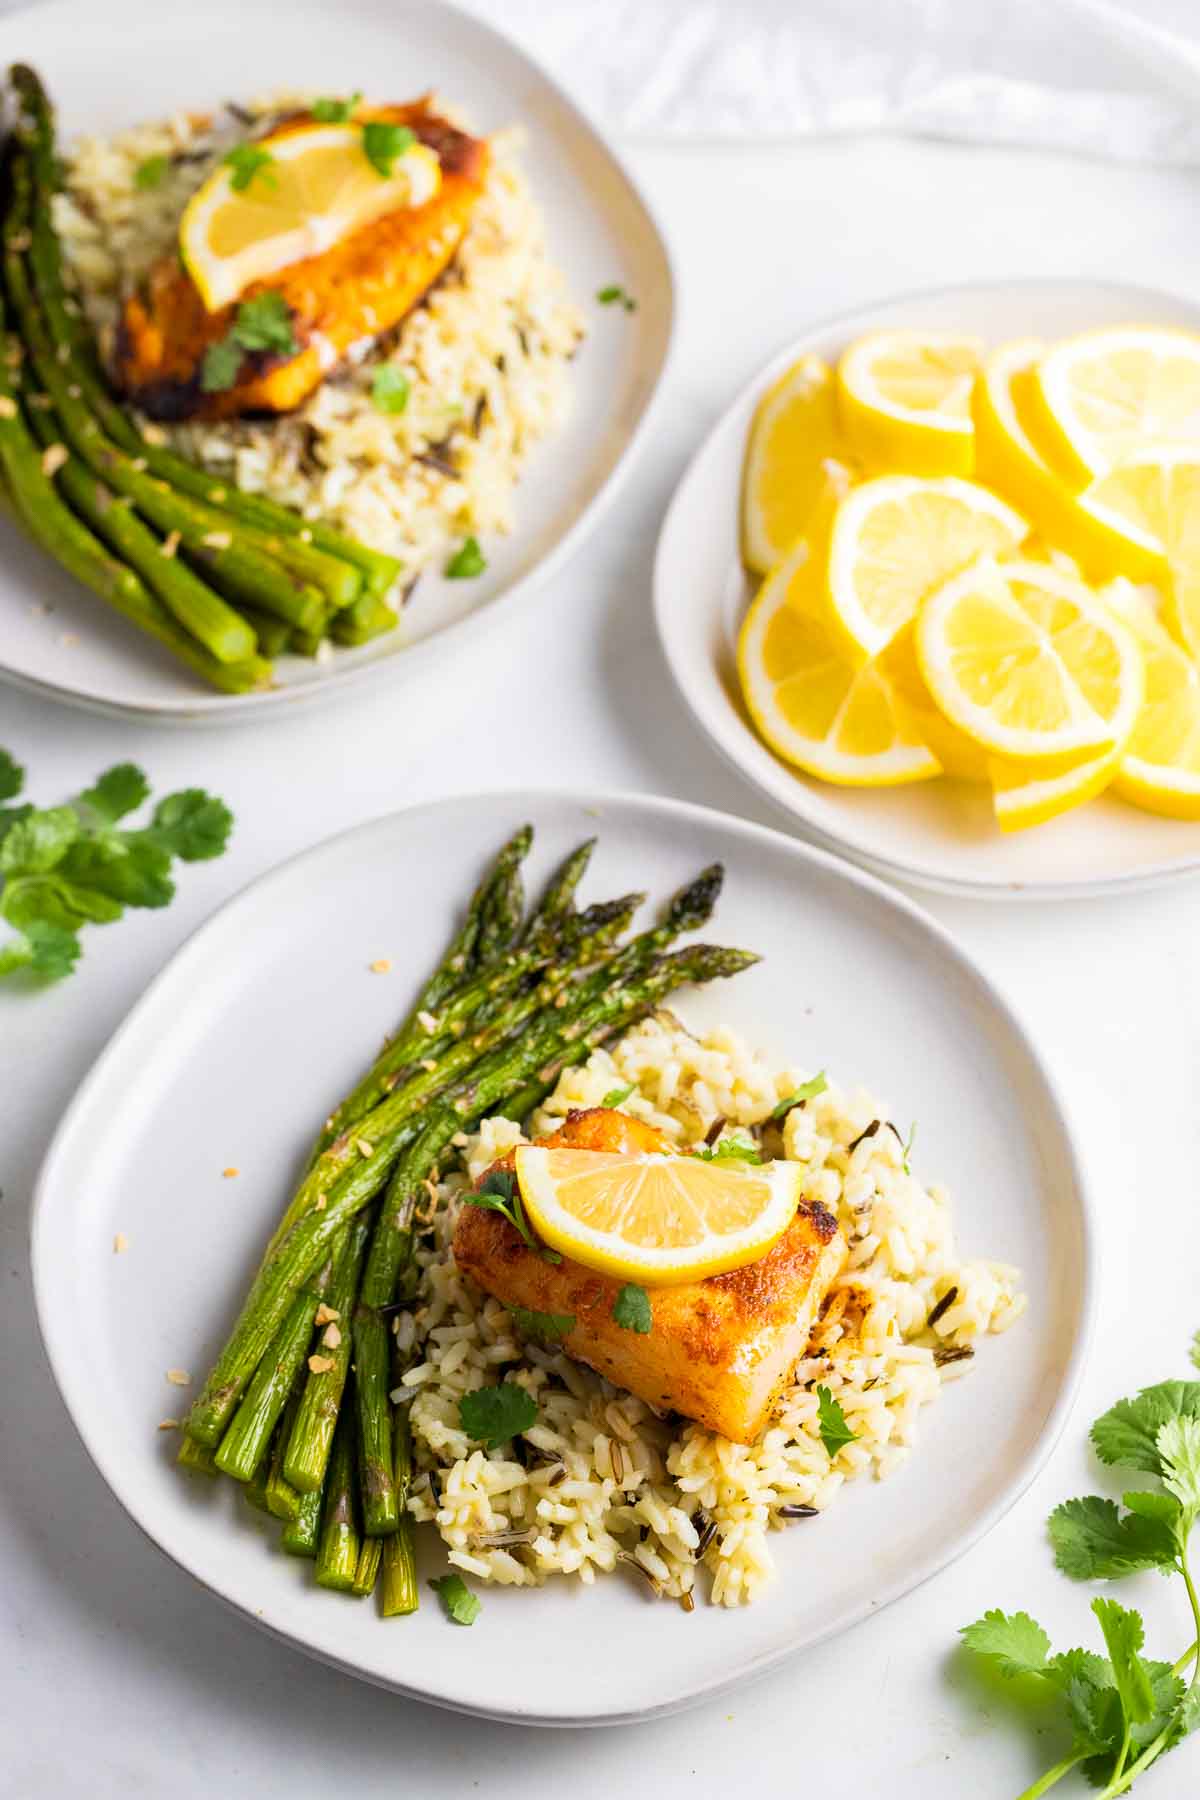 Cajun cod on plate with rice and asparagus.